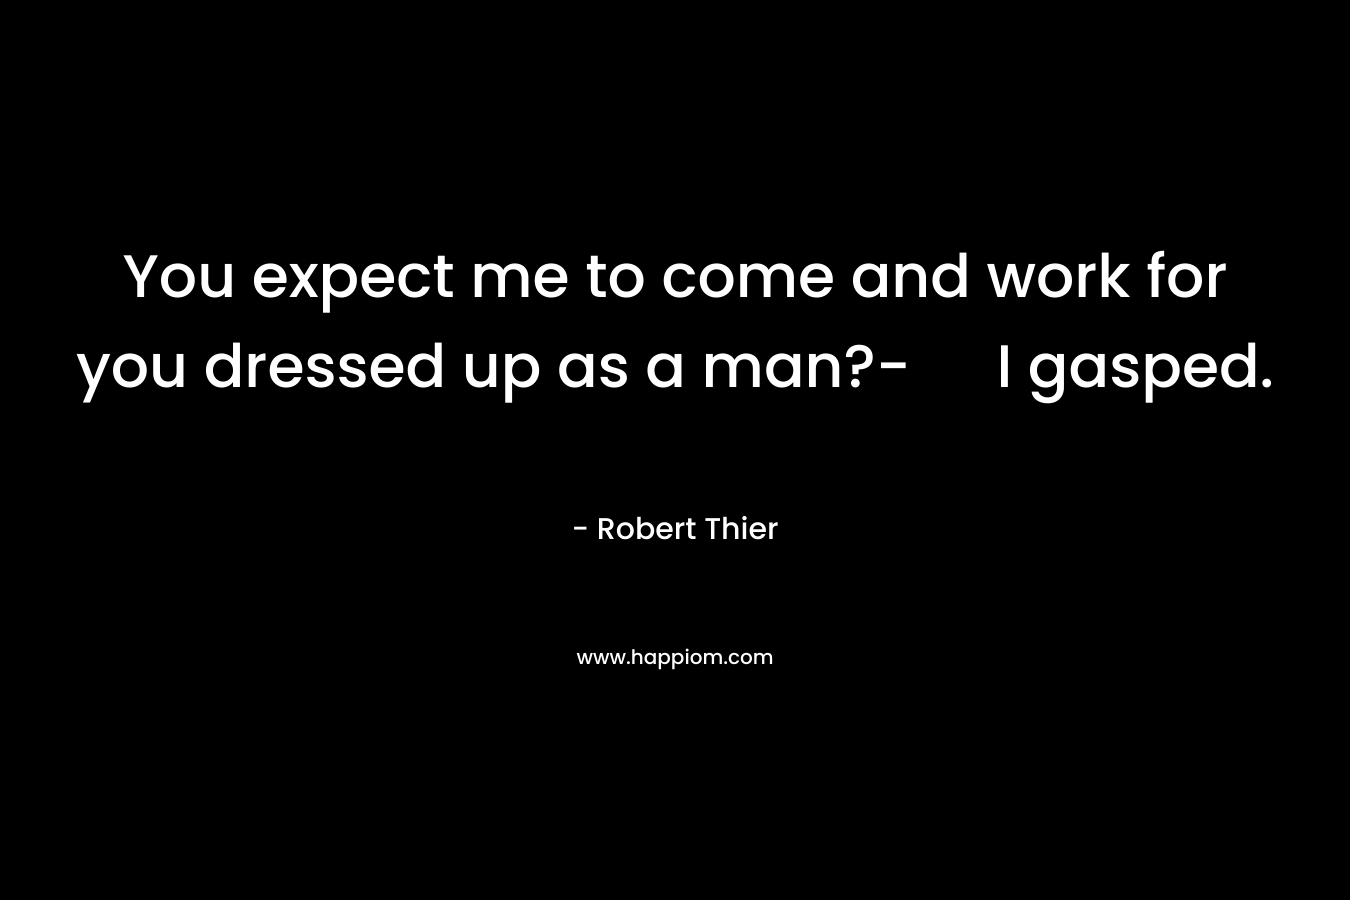 You expect me to come and work for you dressed up as a man?- I gasped. – Robert Thier